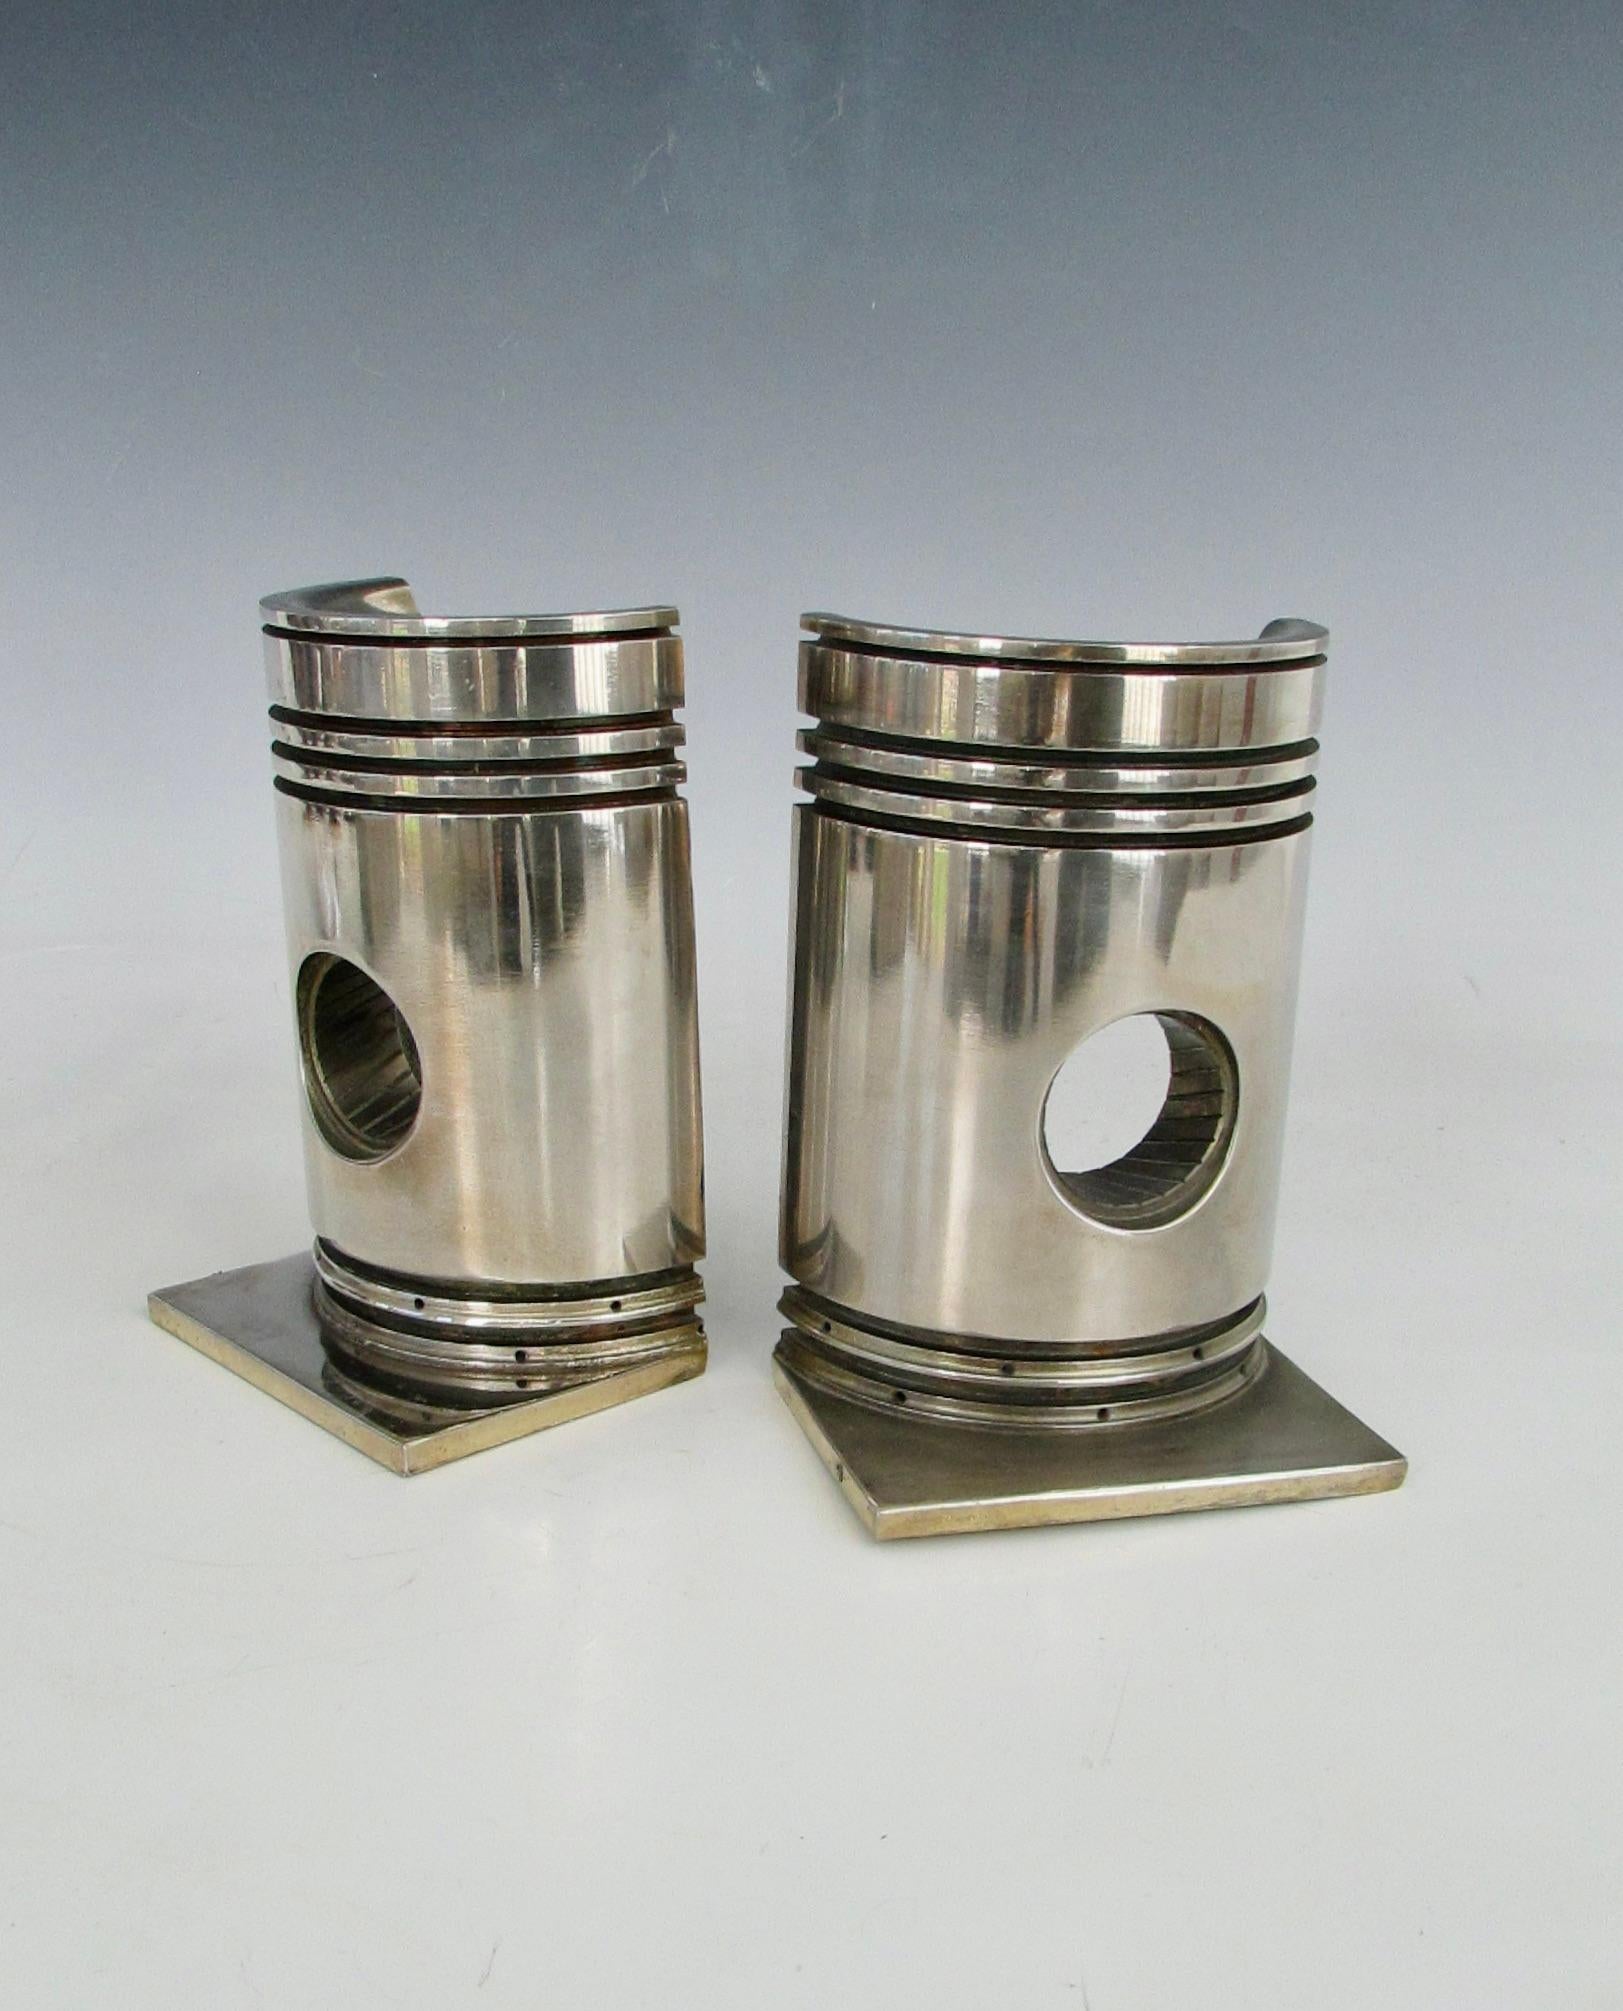 American Machine Age Industrial Nickel Plated Piston Bookends